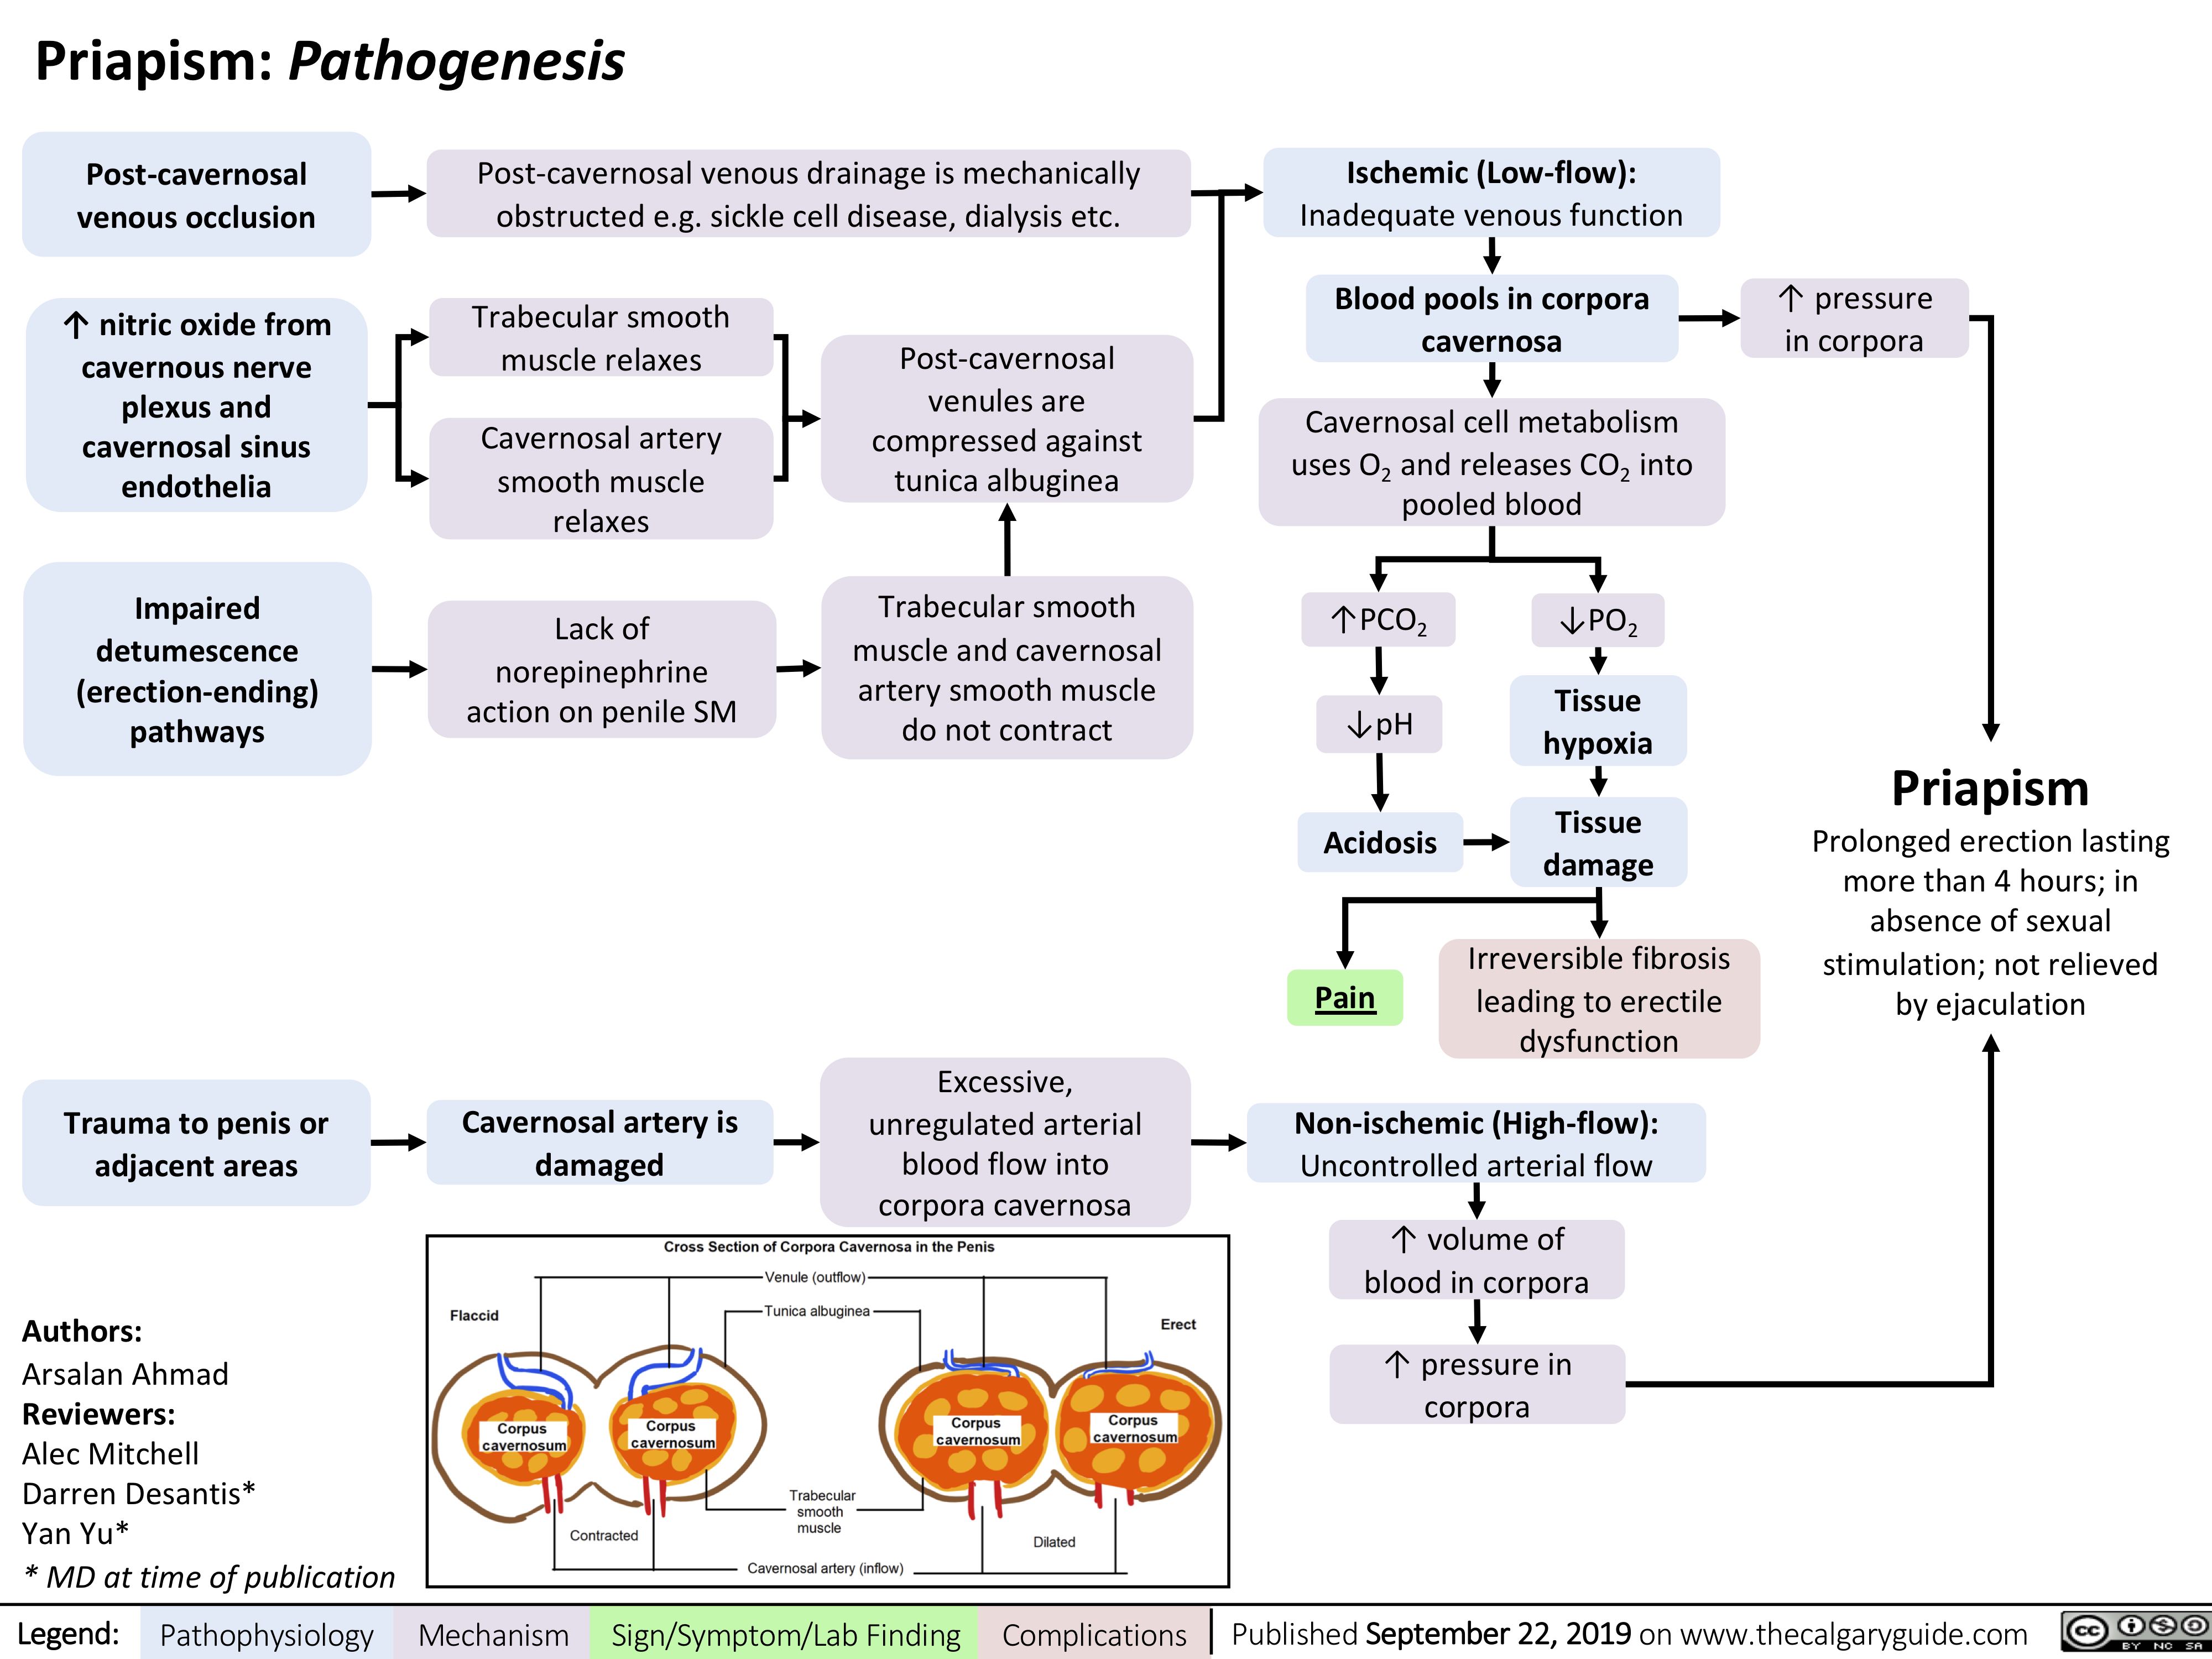 Priapism: Pathogenesis
   Post-cavernosal venous occlusion
↑ nitric oxide from cavernous nerve plexus and cavernosal sinus endothelia
Impaired detumescence (erection-ending) pathways
Post-cavernosal venous drainage is mechanically obstructed e.g. sickle cell disease, dialysis etc.
Ischemic (Low-flow):
Inadequate venous function
Blood pools in corpora cavernosa
Cavernosal cell metabolism uses O2 and releases CO2 into pooled blood
     Trabecular smooth muscle relaxes
Cavernosal artery smooth muscle relaxes
Lack of norepinephrine action on penile SM
Post-cavernosal venules are compressed against tunica albuginea
Trabecular smooth muscle and cavernosal artery smooth muscle do not contract
↑ pressure in corpora
                 ↑PCO2 ↓pH
Acidosis
↓PO2
Tissue hypoxia
Tissue damage
Irreversible fibrosis leading to erectile dysfunction
Priapism
Prolonged erection lasting more than 4 hours; in absence of sexual stimulation; not relieved by ejaculation
                     Trauma to penis or adjacent areas
Authors:
Arsalan Ahmad
Reviewers:
Alec Mitchell
Darren Desantis*
Yan Yu*
* MD at time of publication
Cavernosal artery is damaged
Excessive, unregulated arterial blood flow into corpora cavernosa
Pain
Non-ischemic (High-flow):
    Uncontrolled arterial flow
↑ volume of blood in corpora
↑ pressure in corpora
      Legend:
 Pathophysiology
Mechanism
Sign/Symptom/Lab Finding
  Complications
 Published September 22, 2019 on www.thecalgaryguide.com
   